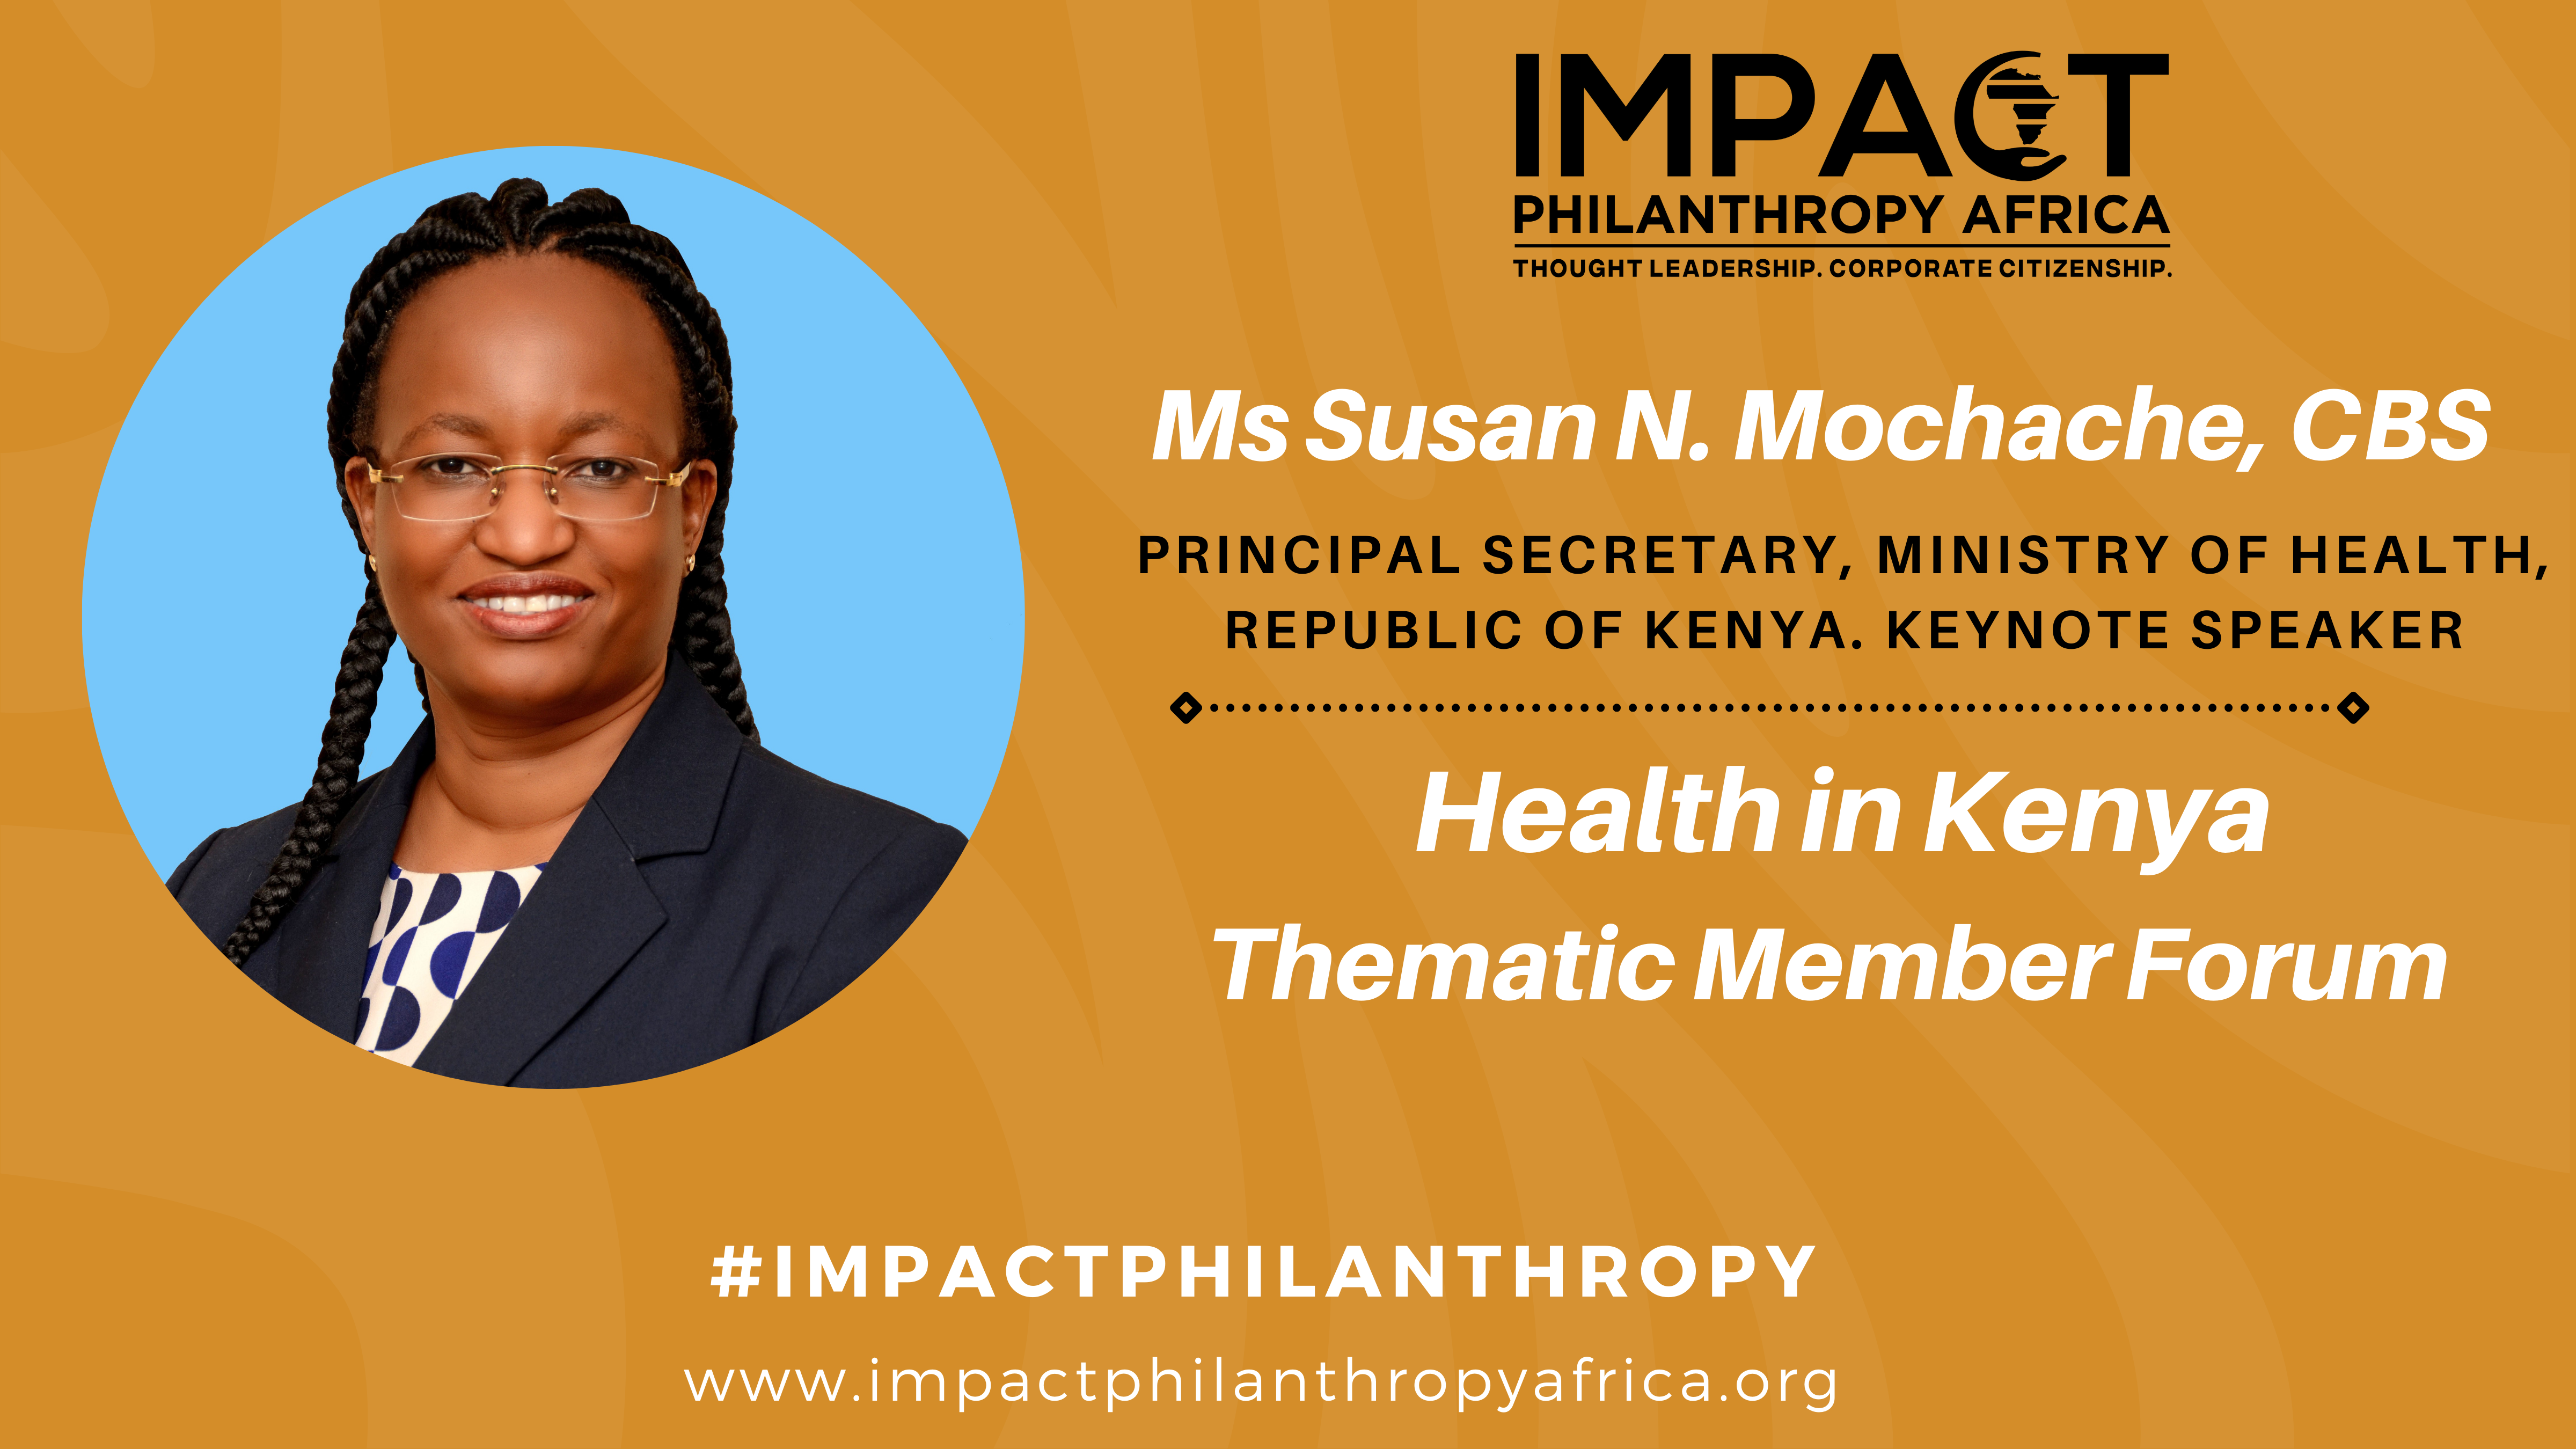 Remarks by Susan Mochache, CBS, Principal Secretary, Ministry of Health, During The Impact Philanthrophy Africa Forum On Health On Wednesday, 13.10.2021 At 9:00am